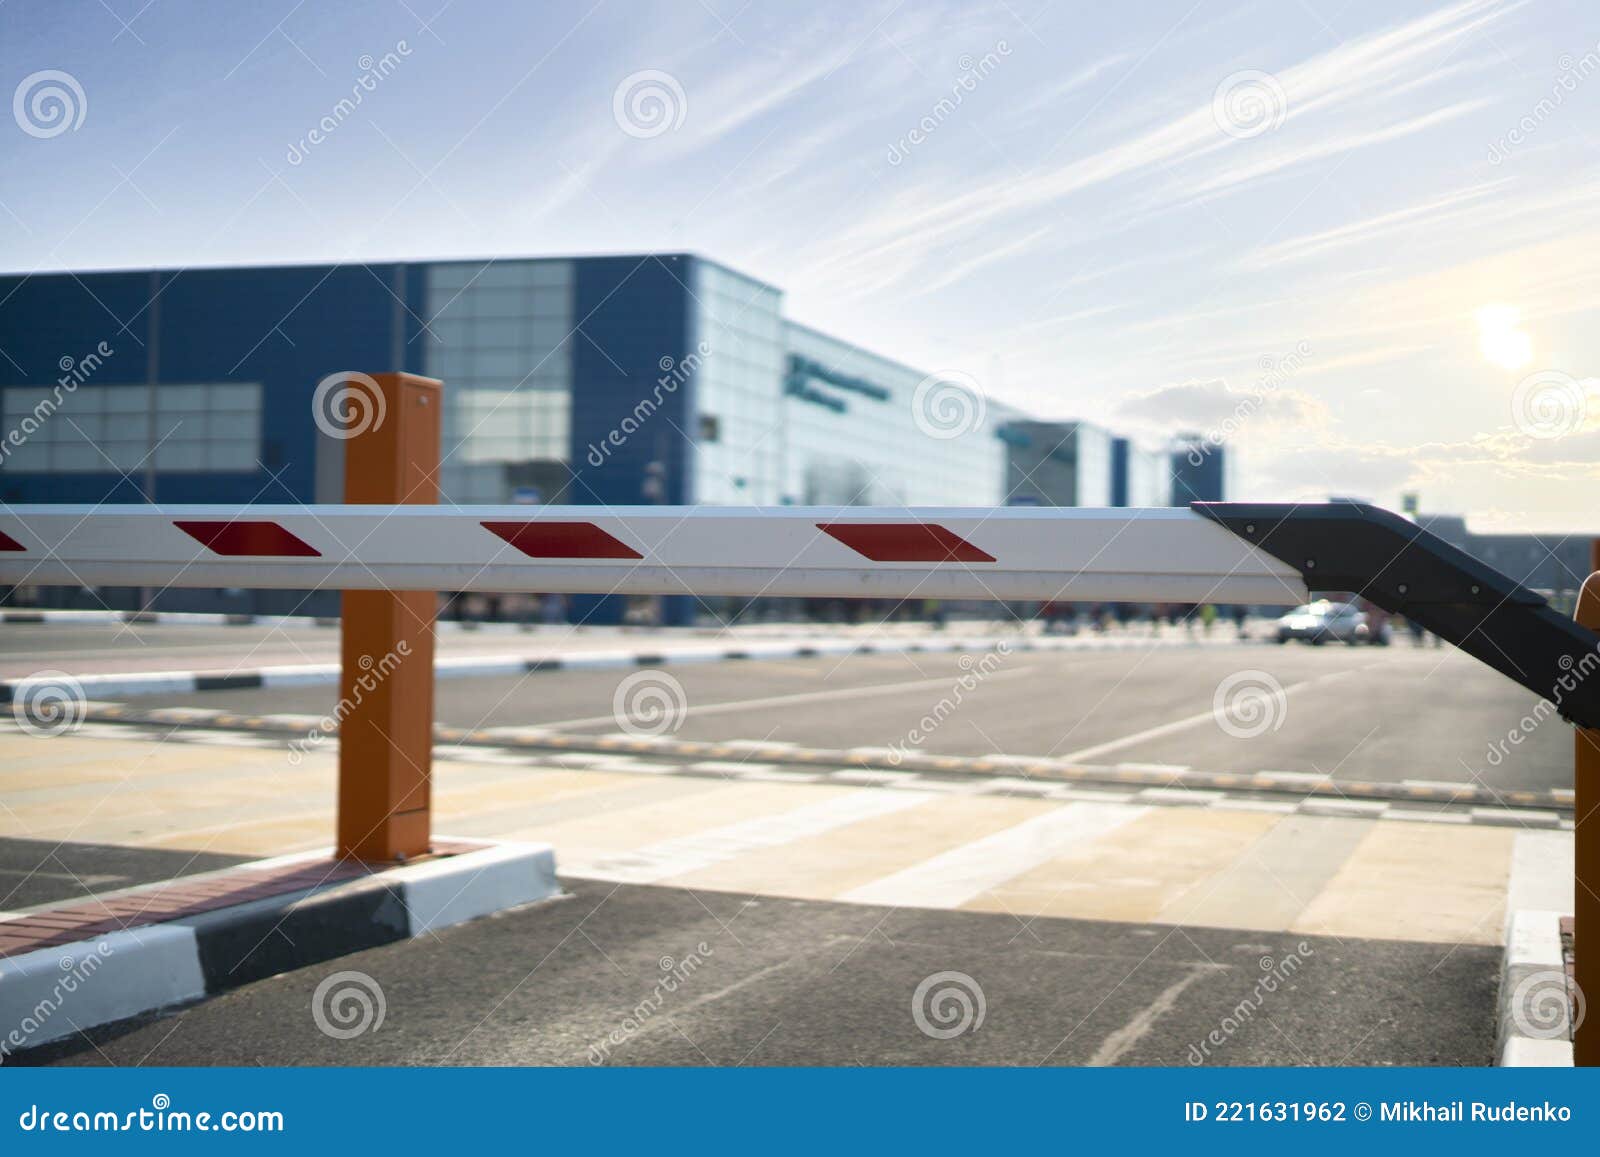 A Road Car Gate Barrier, Safety Entrance Pass Stock Photo - Image of ...